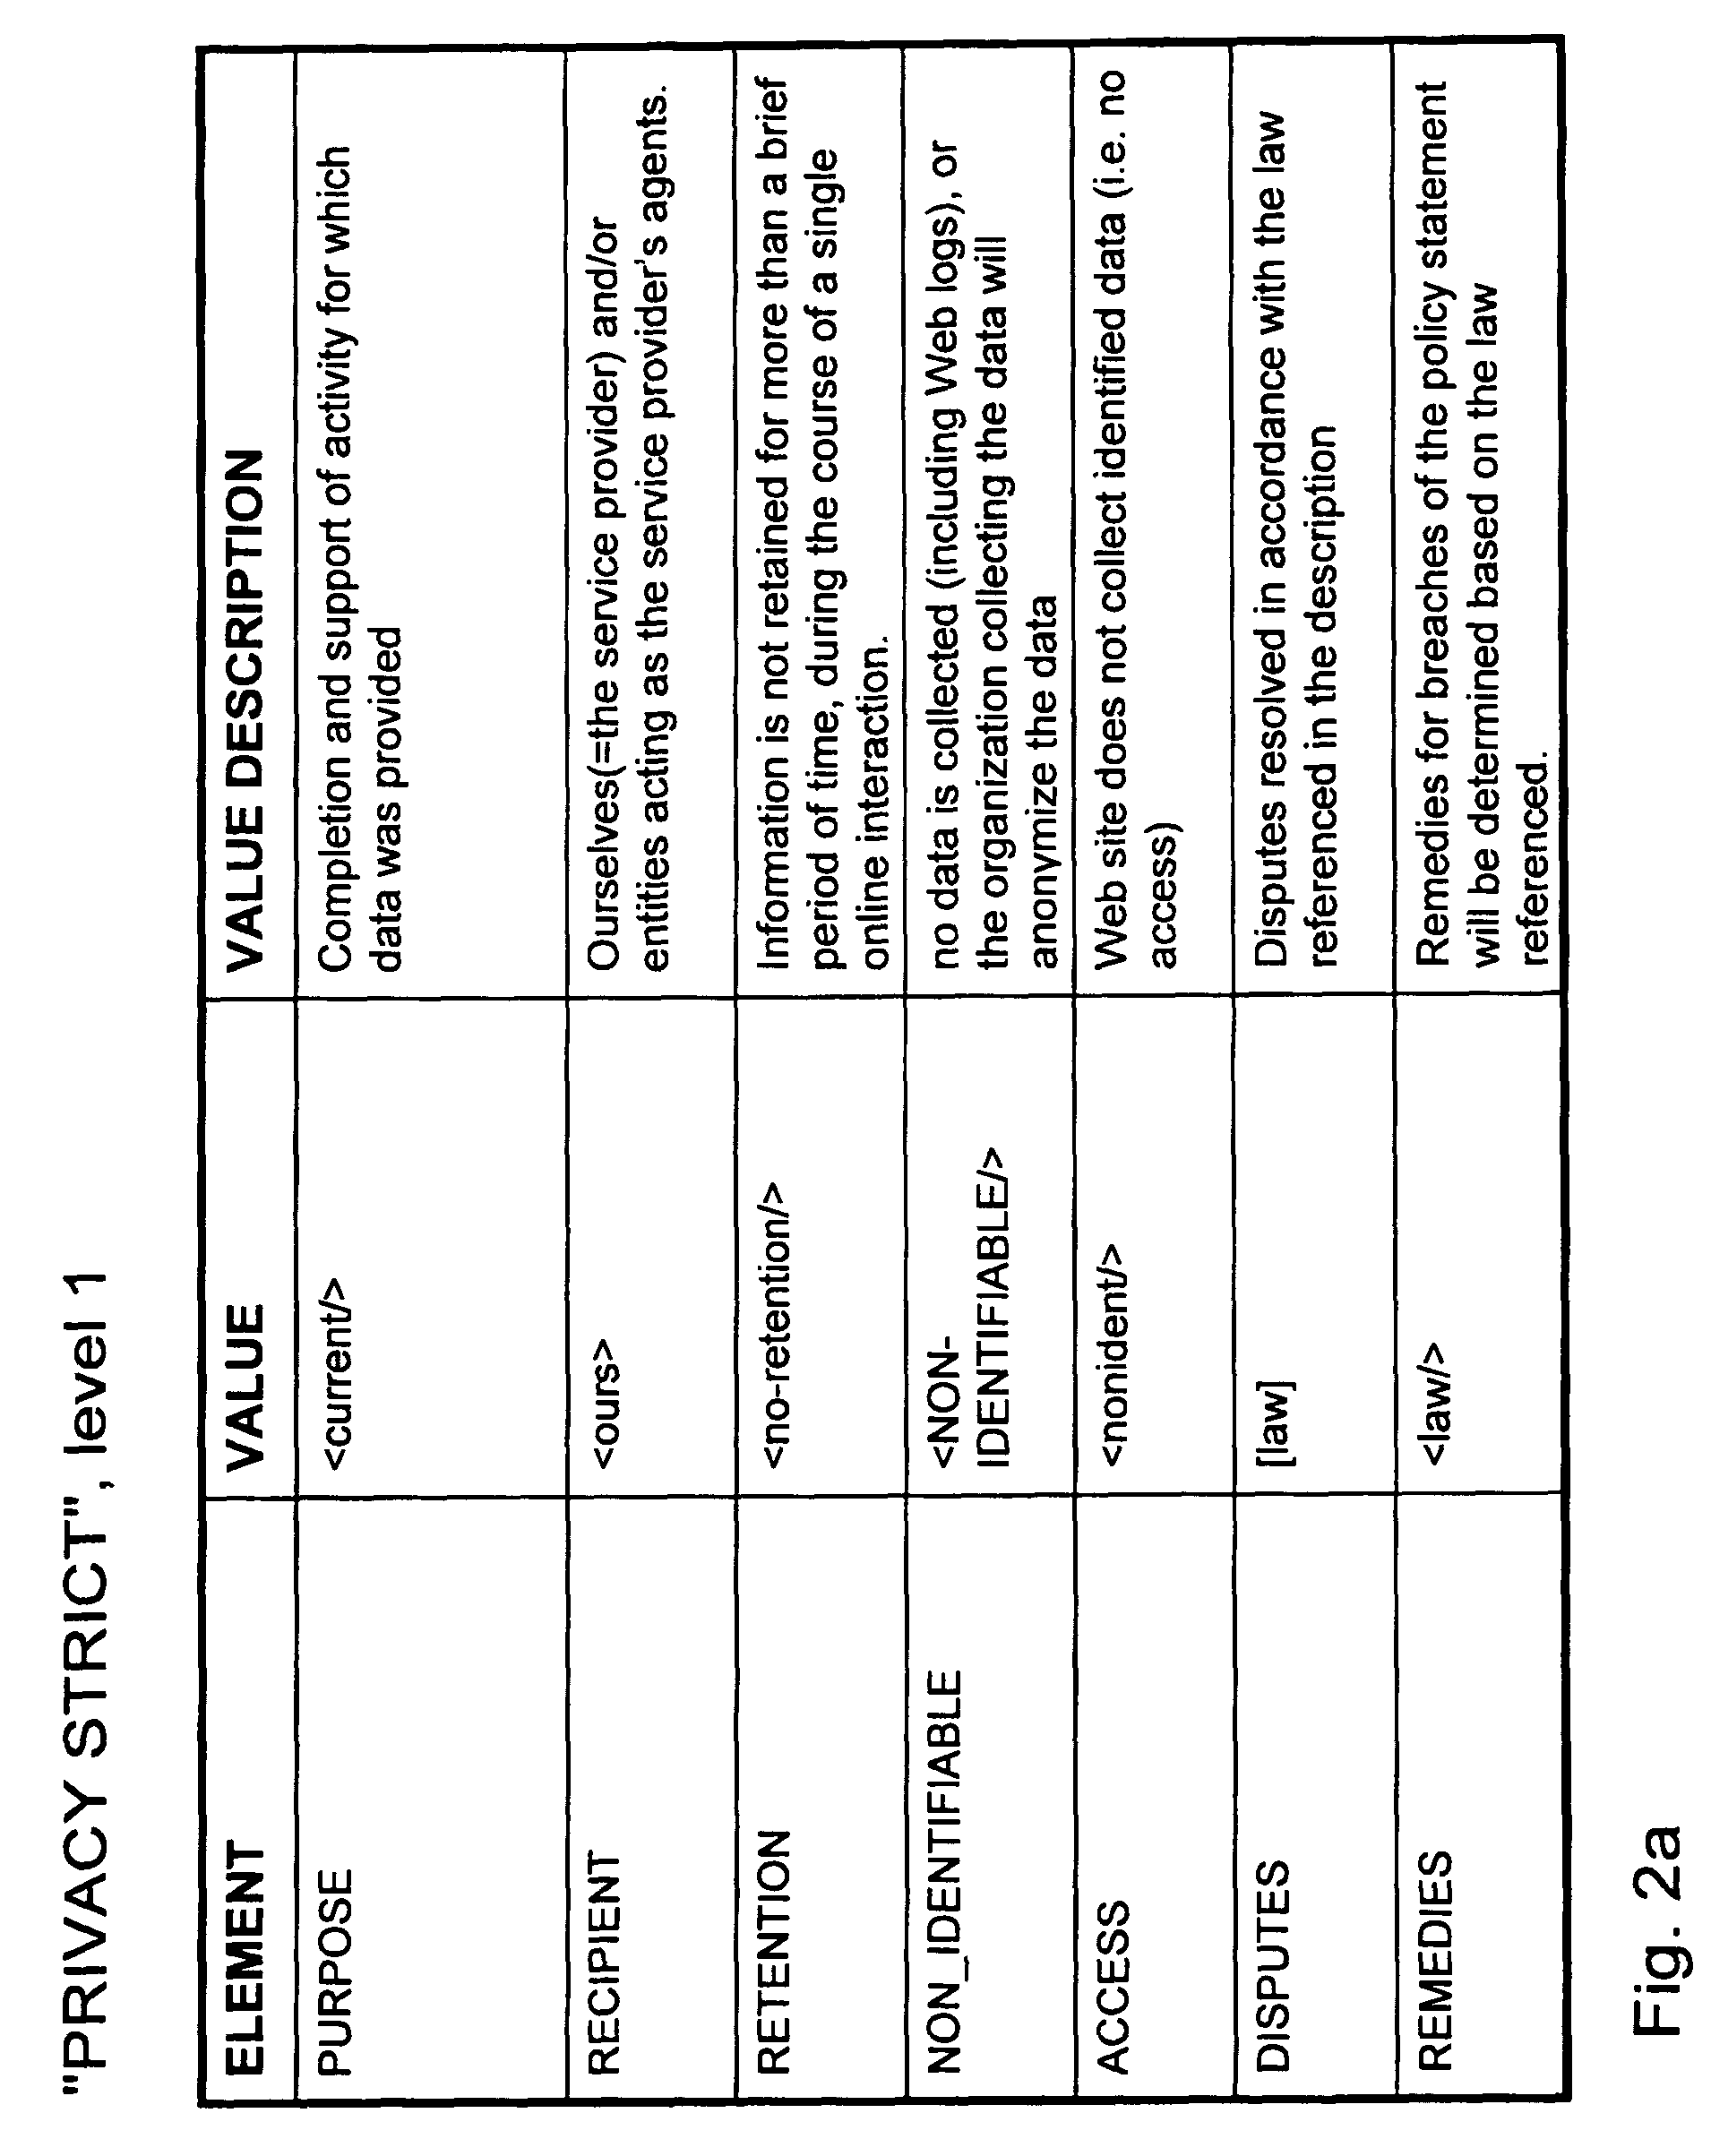 Method and apparatus for transmitting data subject to privacy restrictions